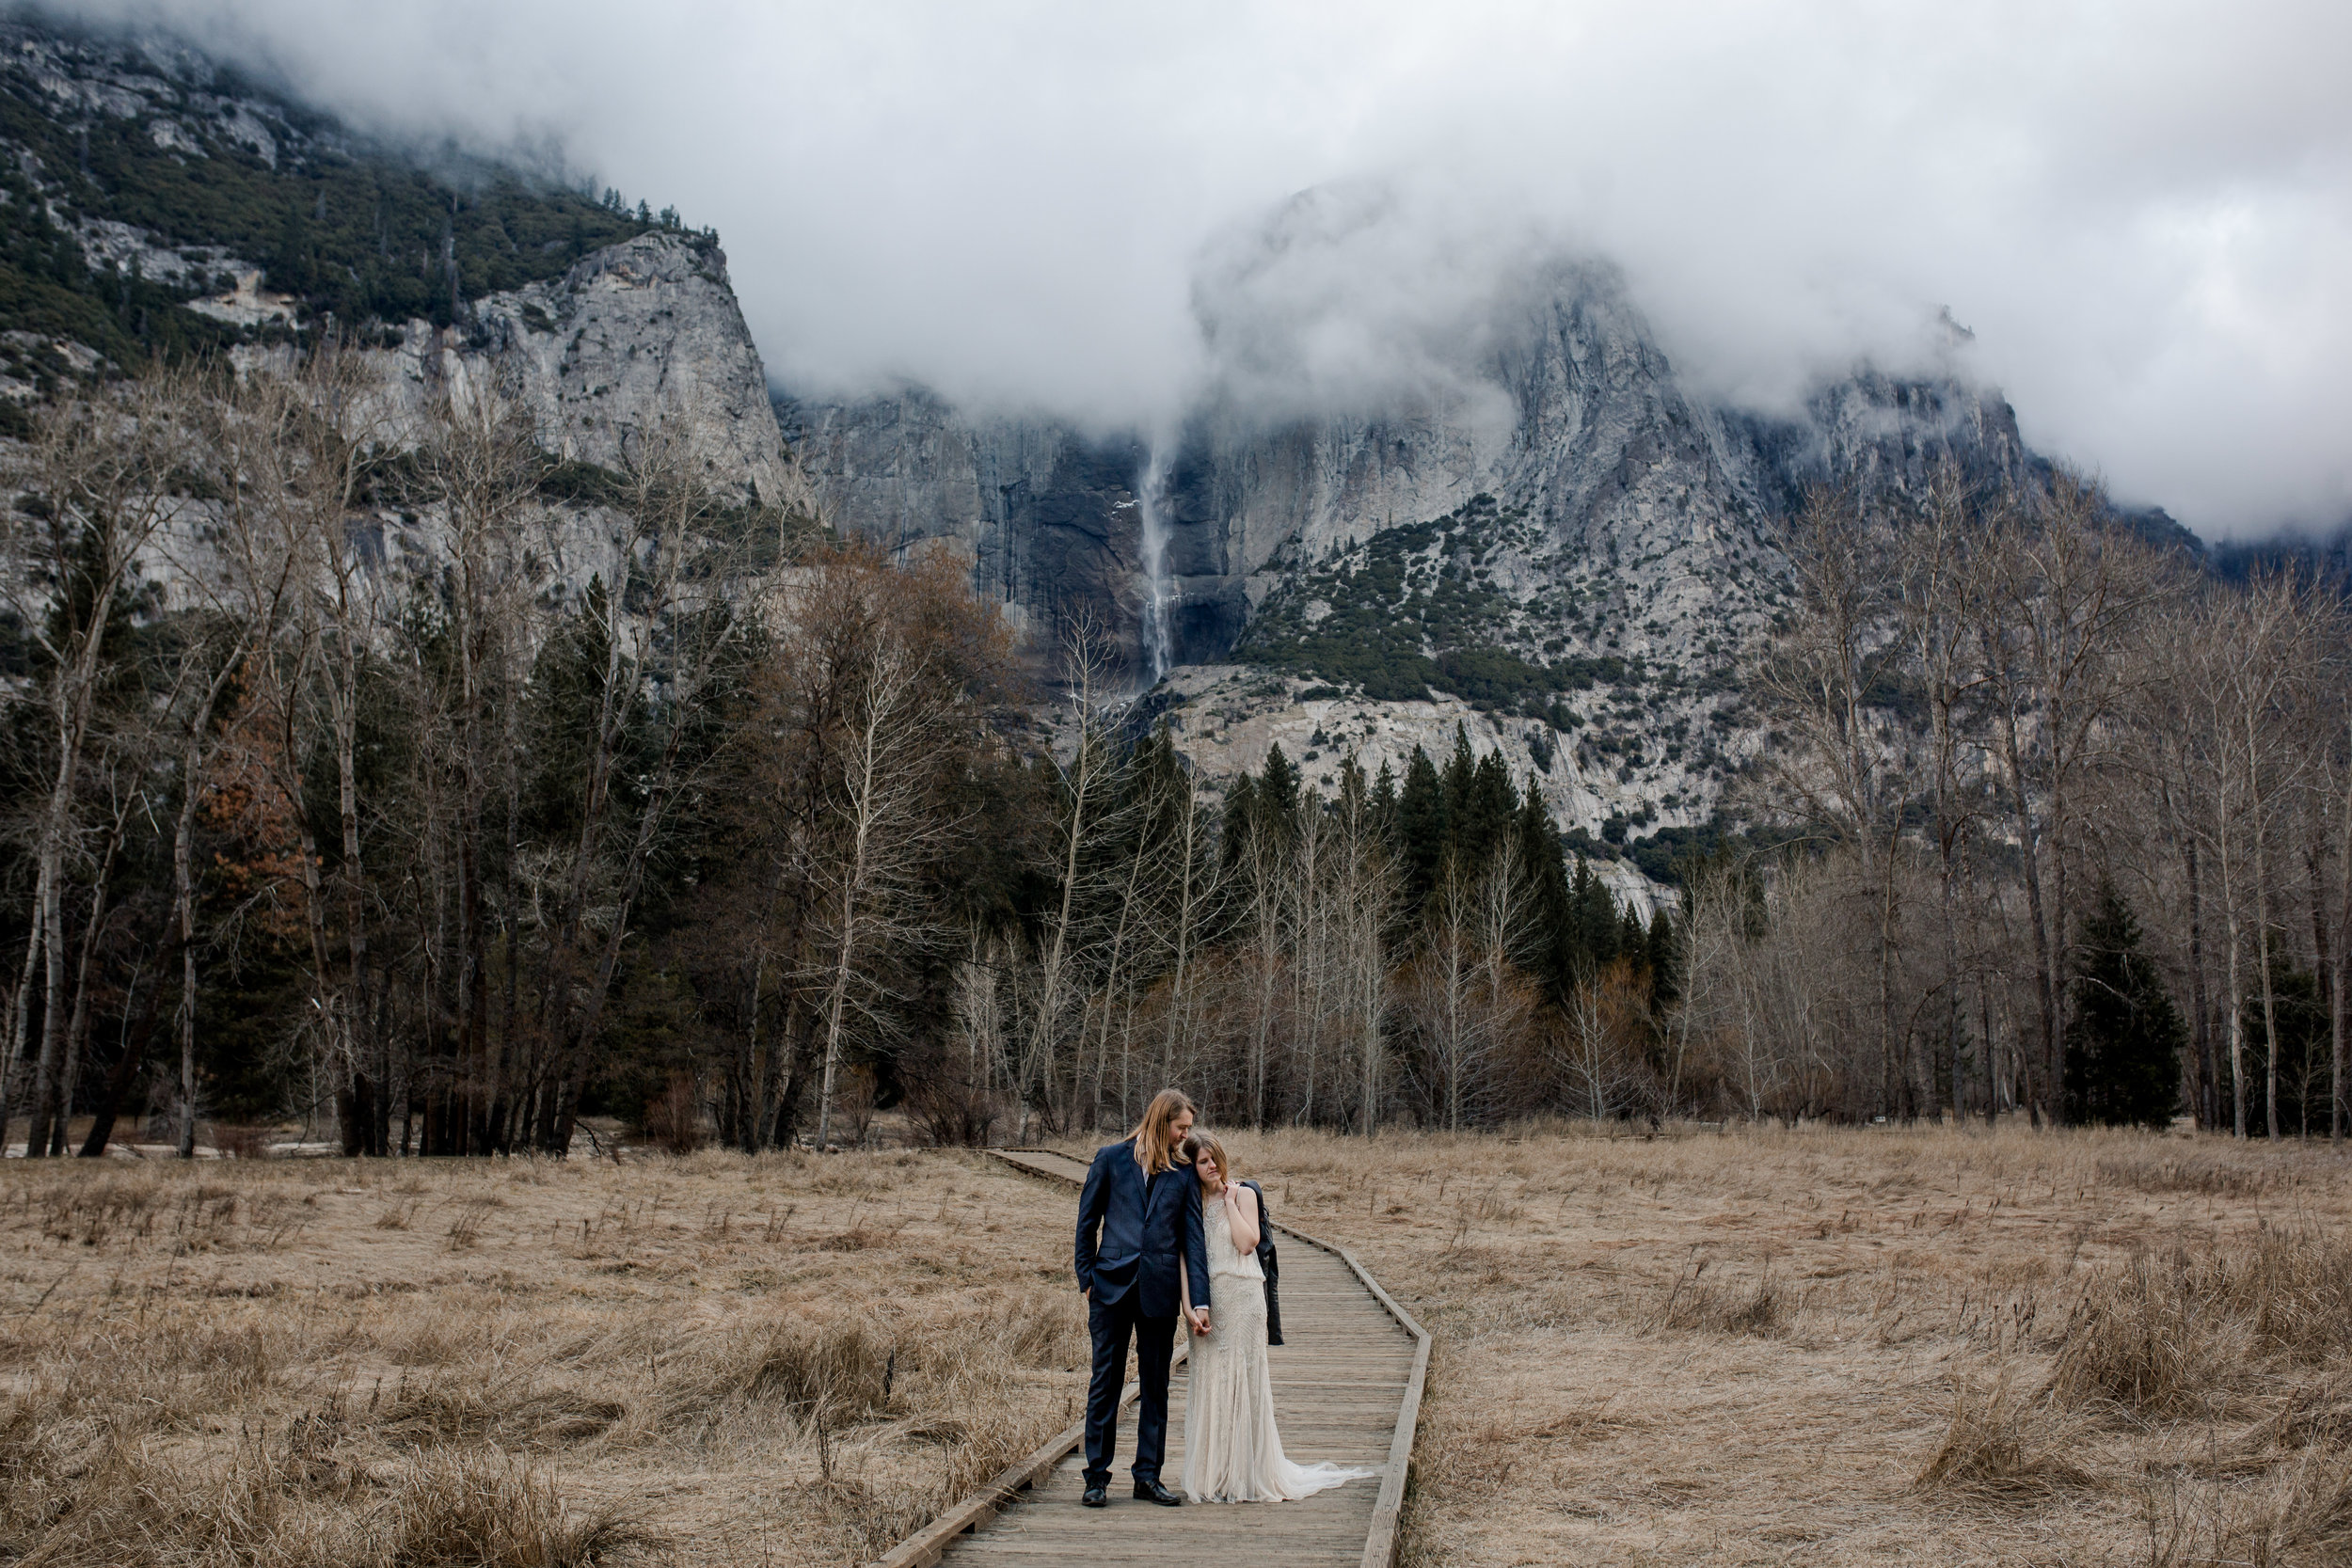 nicole-daacke-photography-yousemite-national-park-elopement-photographer-winter-cloud-moody-elope-inspiration-yosemite-valley-tunnel-view-winter-cloud-fog-weather-wedding-photos-94.jpg